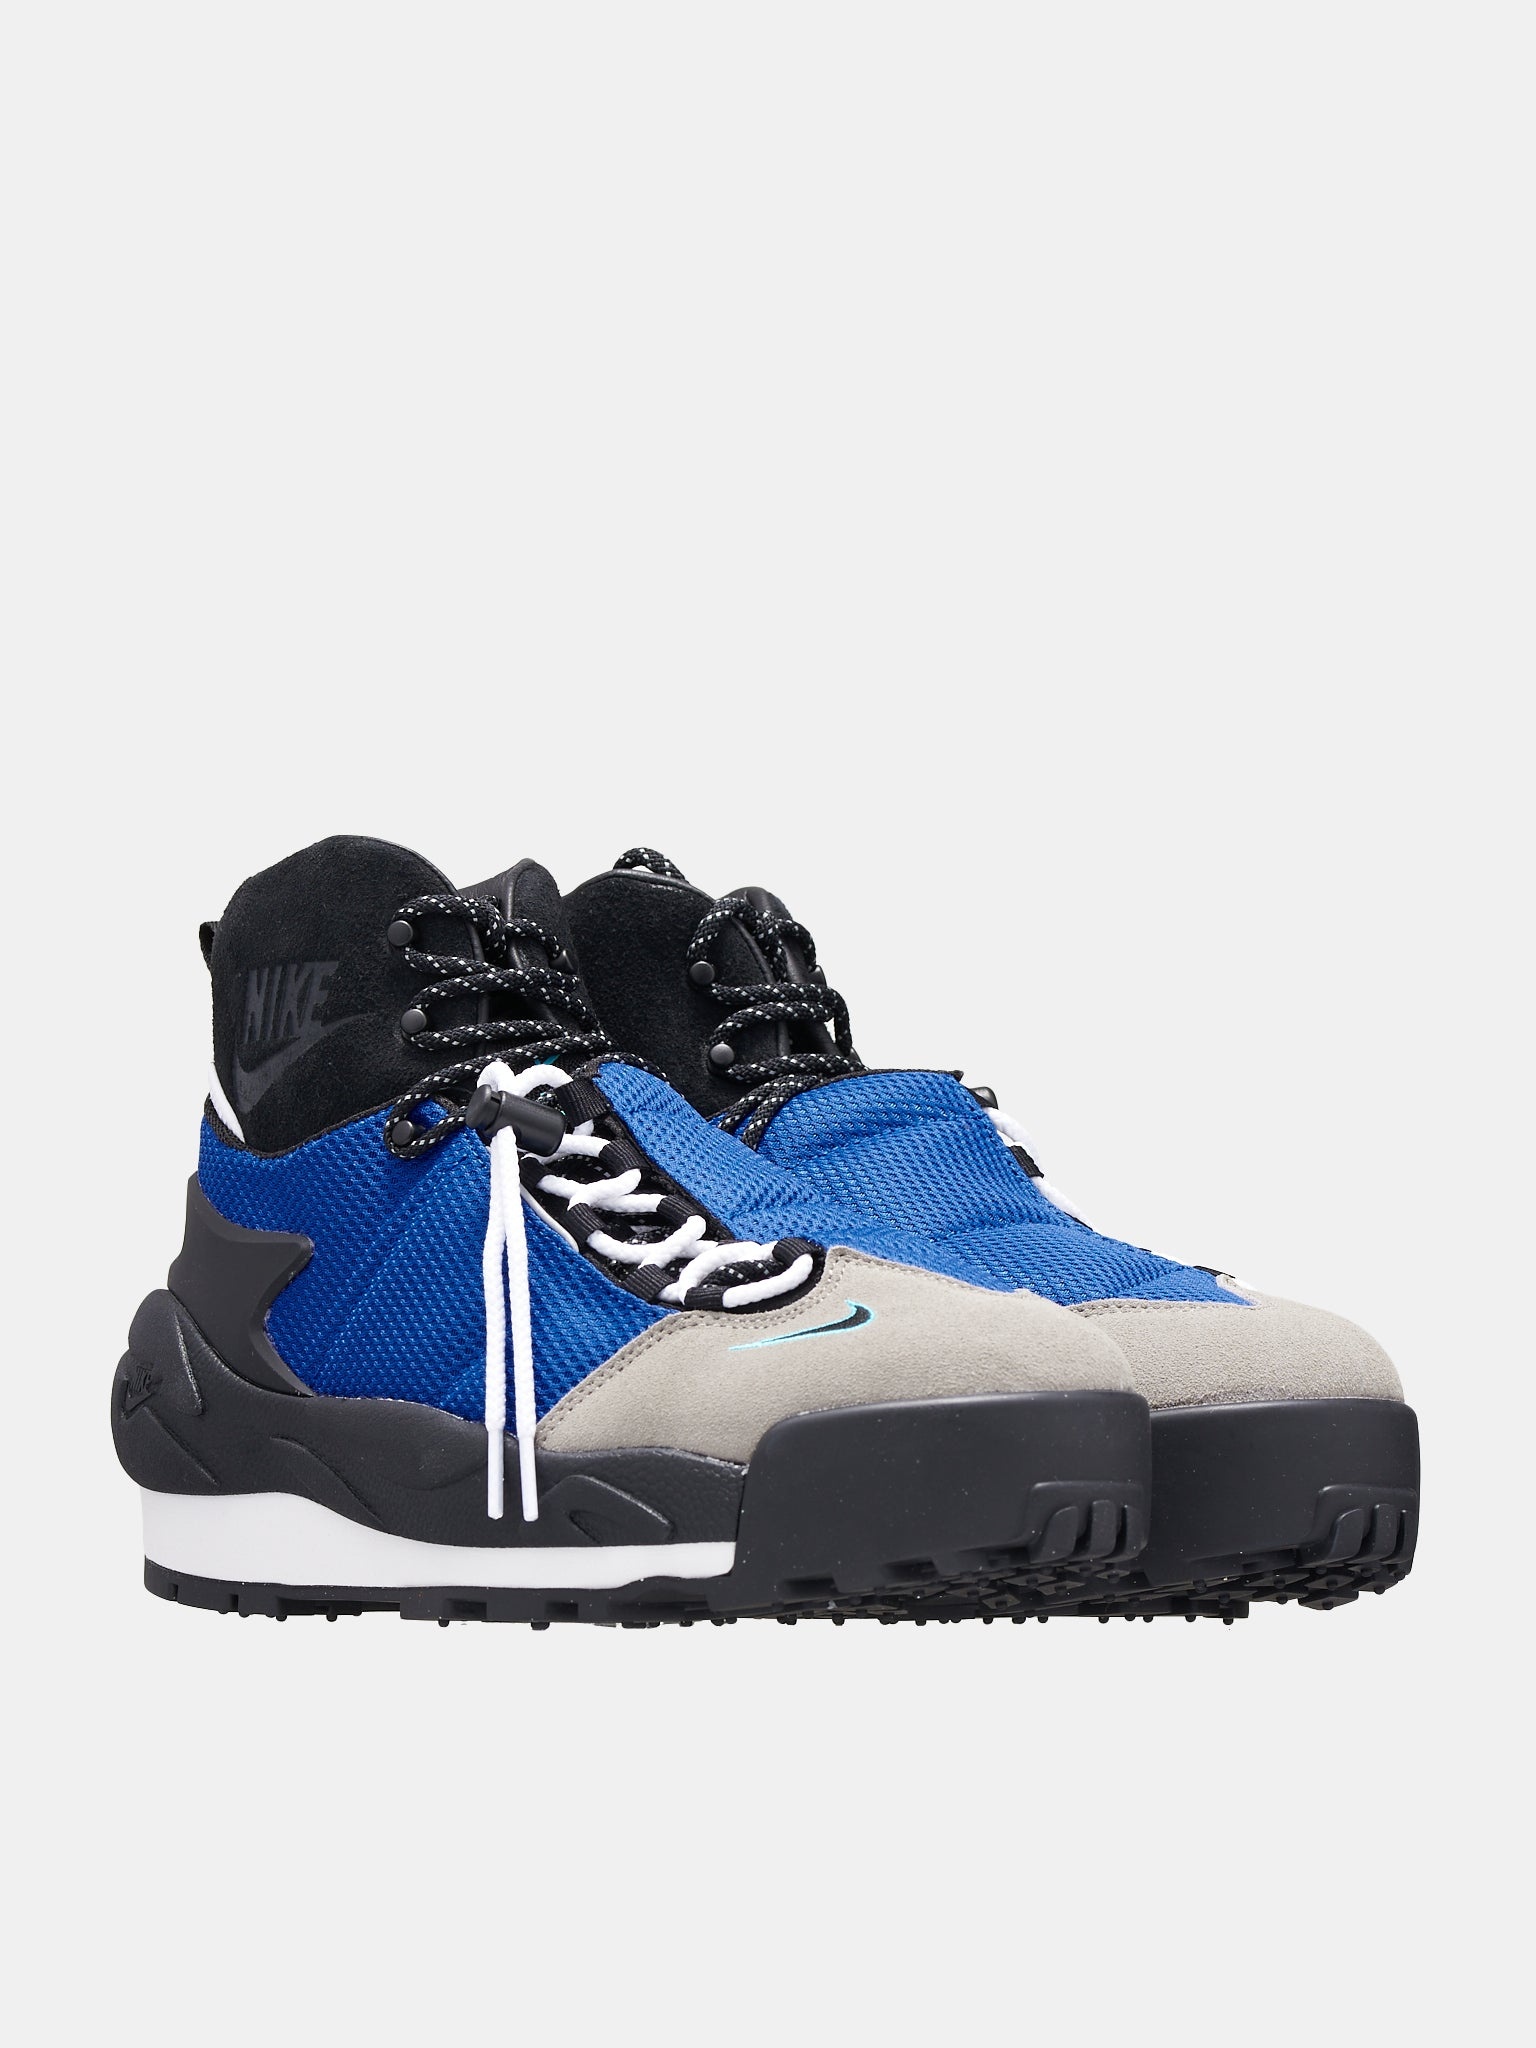 Sacai Magmascape SP Sneakers - 2